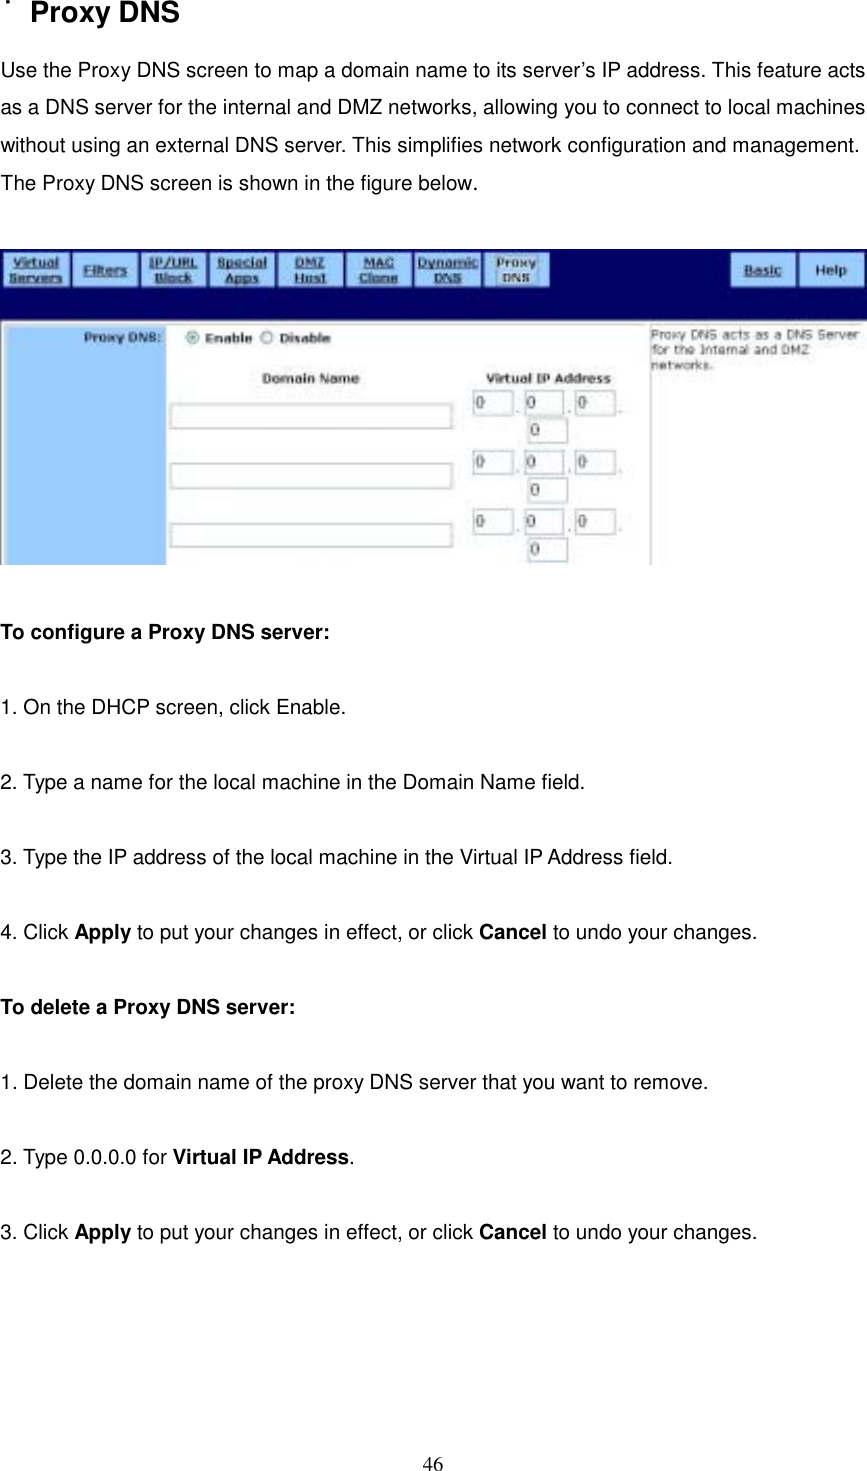  46˙Proxy DNS Use the Proxy DNS screen to map a domain name to its server’s IP address. This feature acts as a DNS server for the internal and DMZ networks, allowing you to connect to local machines without using an external DNS server. This simplifies network configuration and management.   The Proxy DNS screen is shown in the figure below.    To configure a Proxy DNS server:  1. On the DHCP screen, click Enable.  2. Type a name for the local machine in the Domain Name field.  3. Type the IP address of the local machine in the Virtual IP Address field.  4. Click Apply to put your changes in effect, or click Cancel to undo your changes.  To delete a Proxy DNS server:  1. Delete the domain name of the proxy DNS server that you want to remove.  2. Type 0.0.0.0 for Virtual IP Address.  3. Click Apply to put your changes in effect, or click Cancel to undo your changes.     